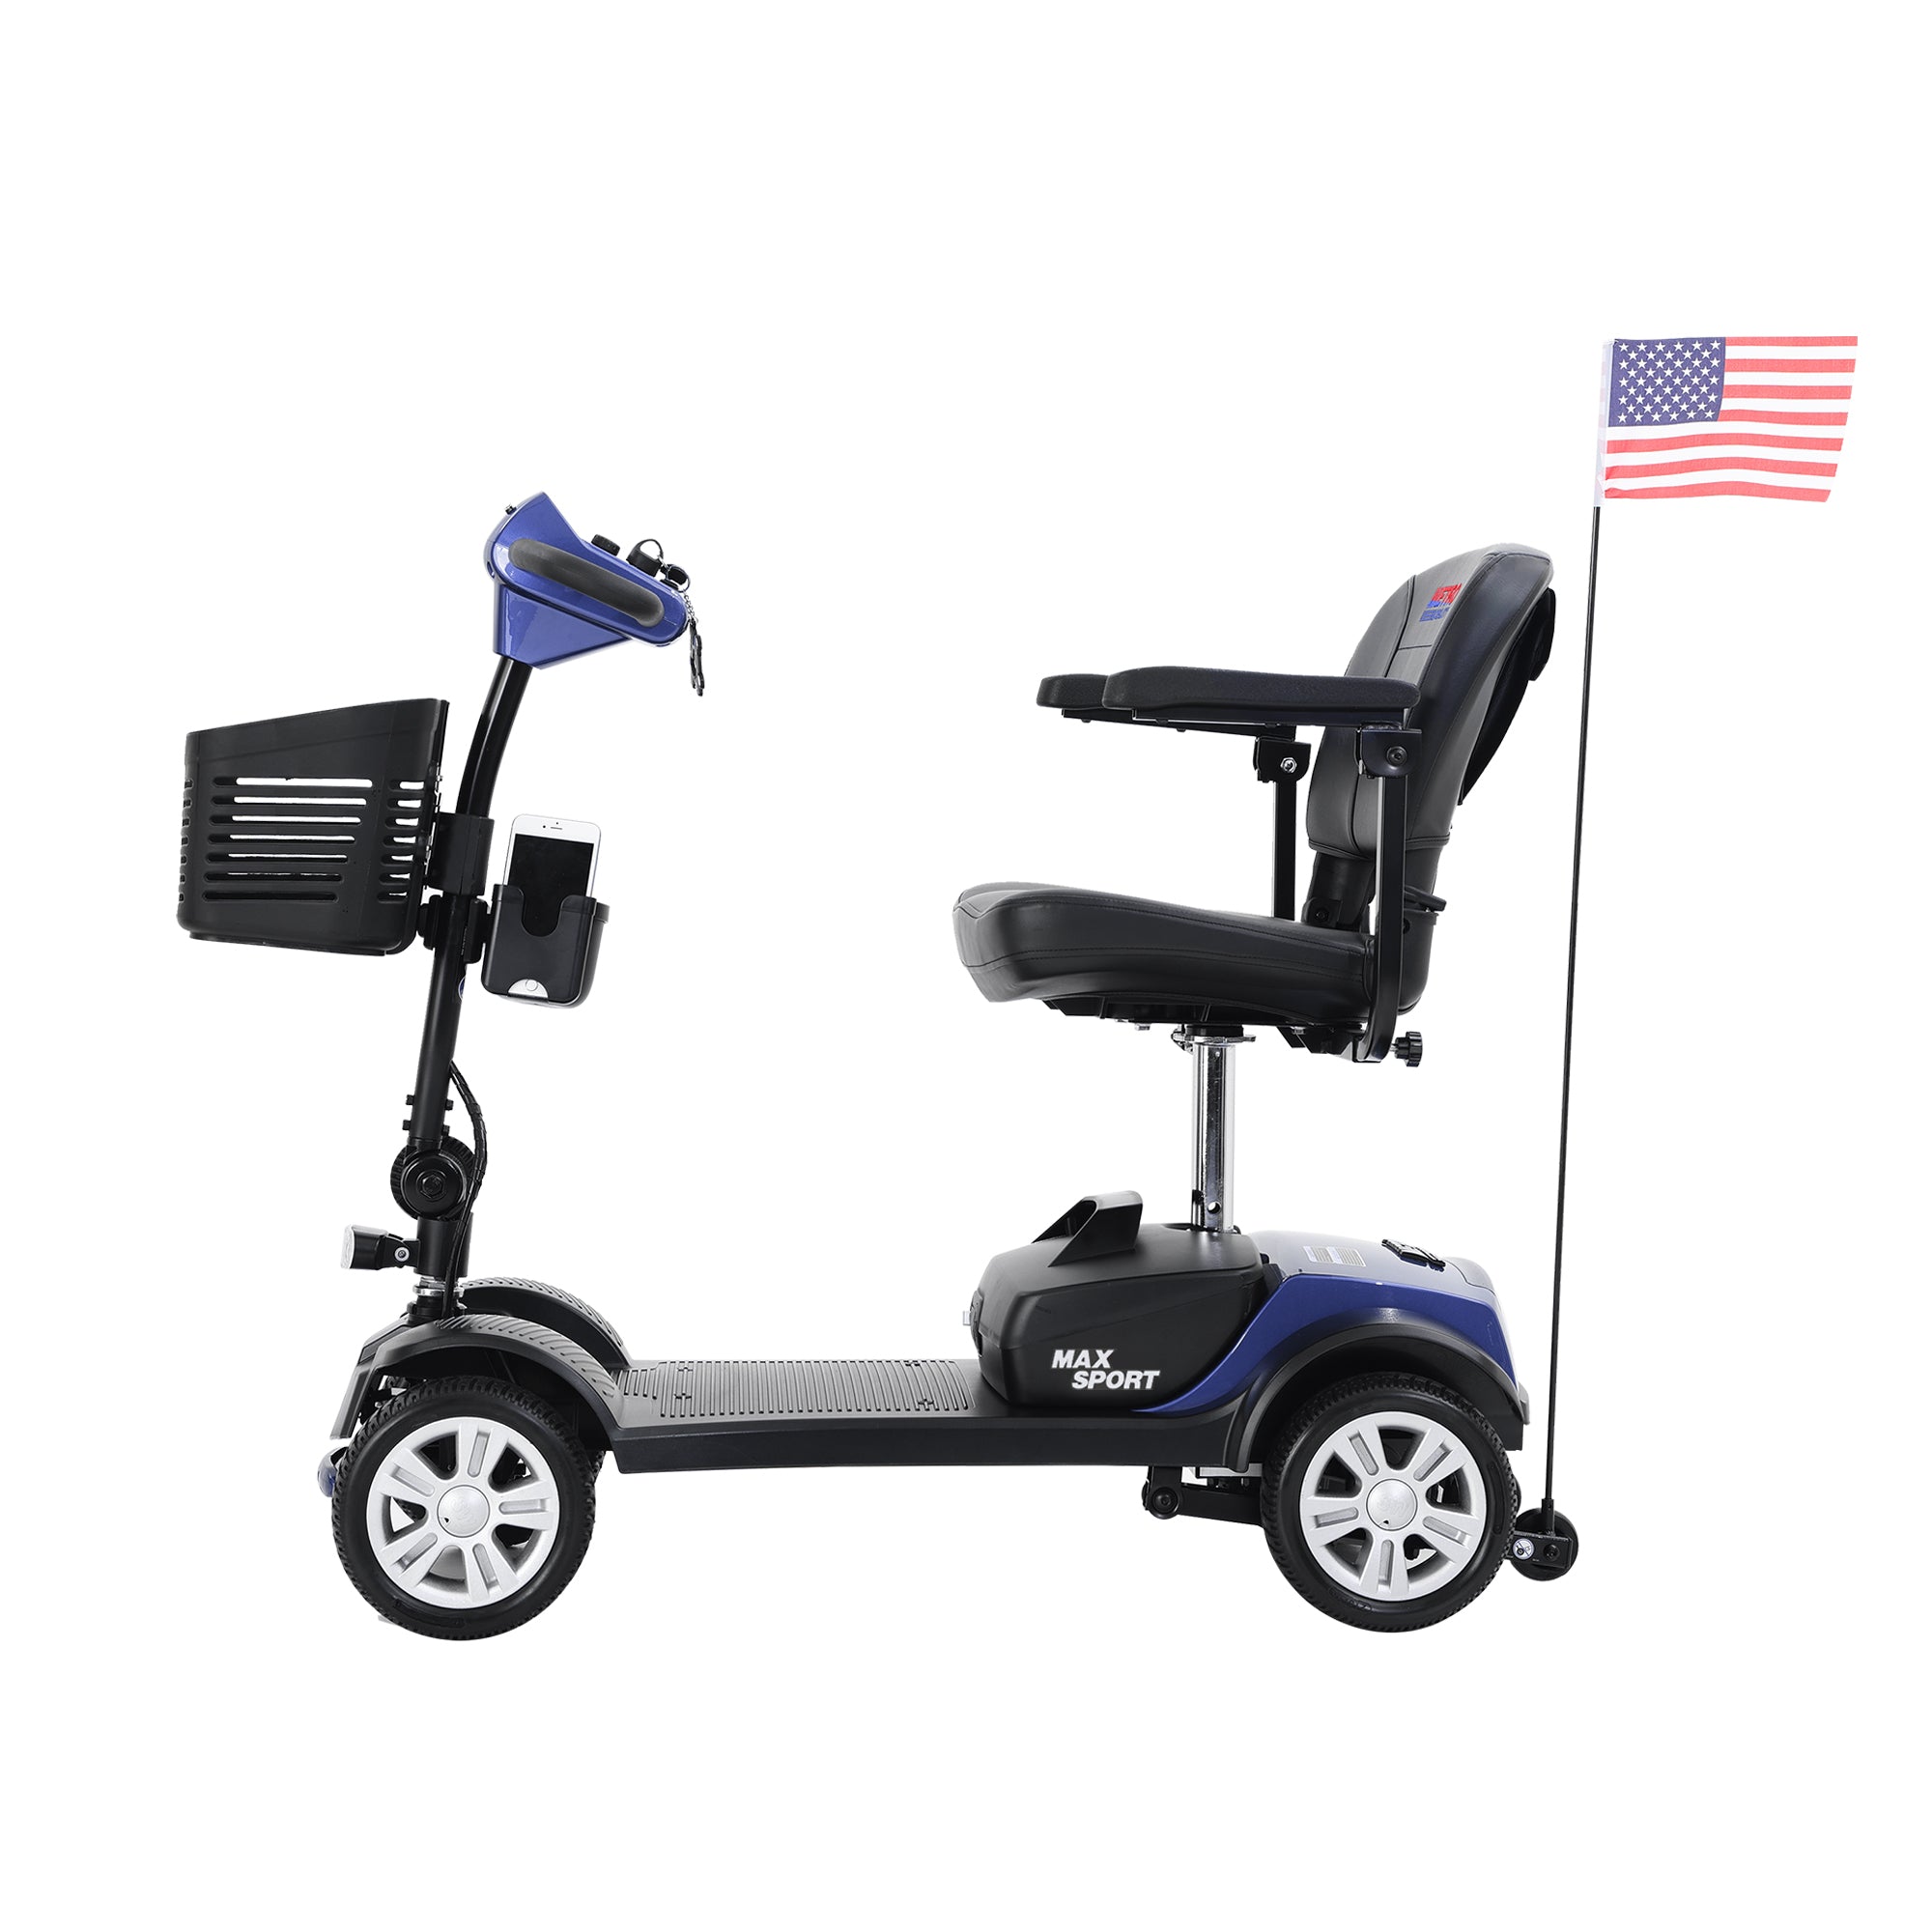 ametoys SPORT BLUE 4 Wheels Outdoor Compact Mobility Scooter with 2 in 1 Cup & Phone Holder